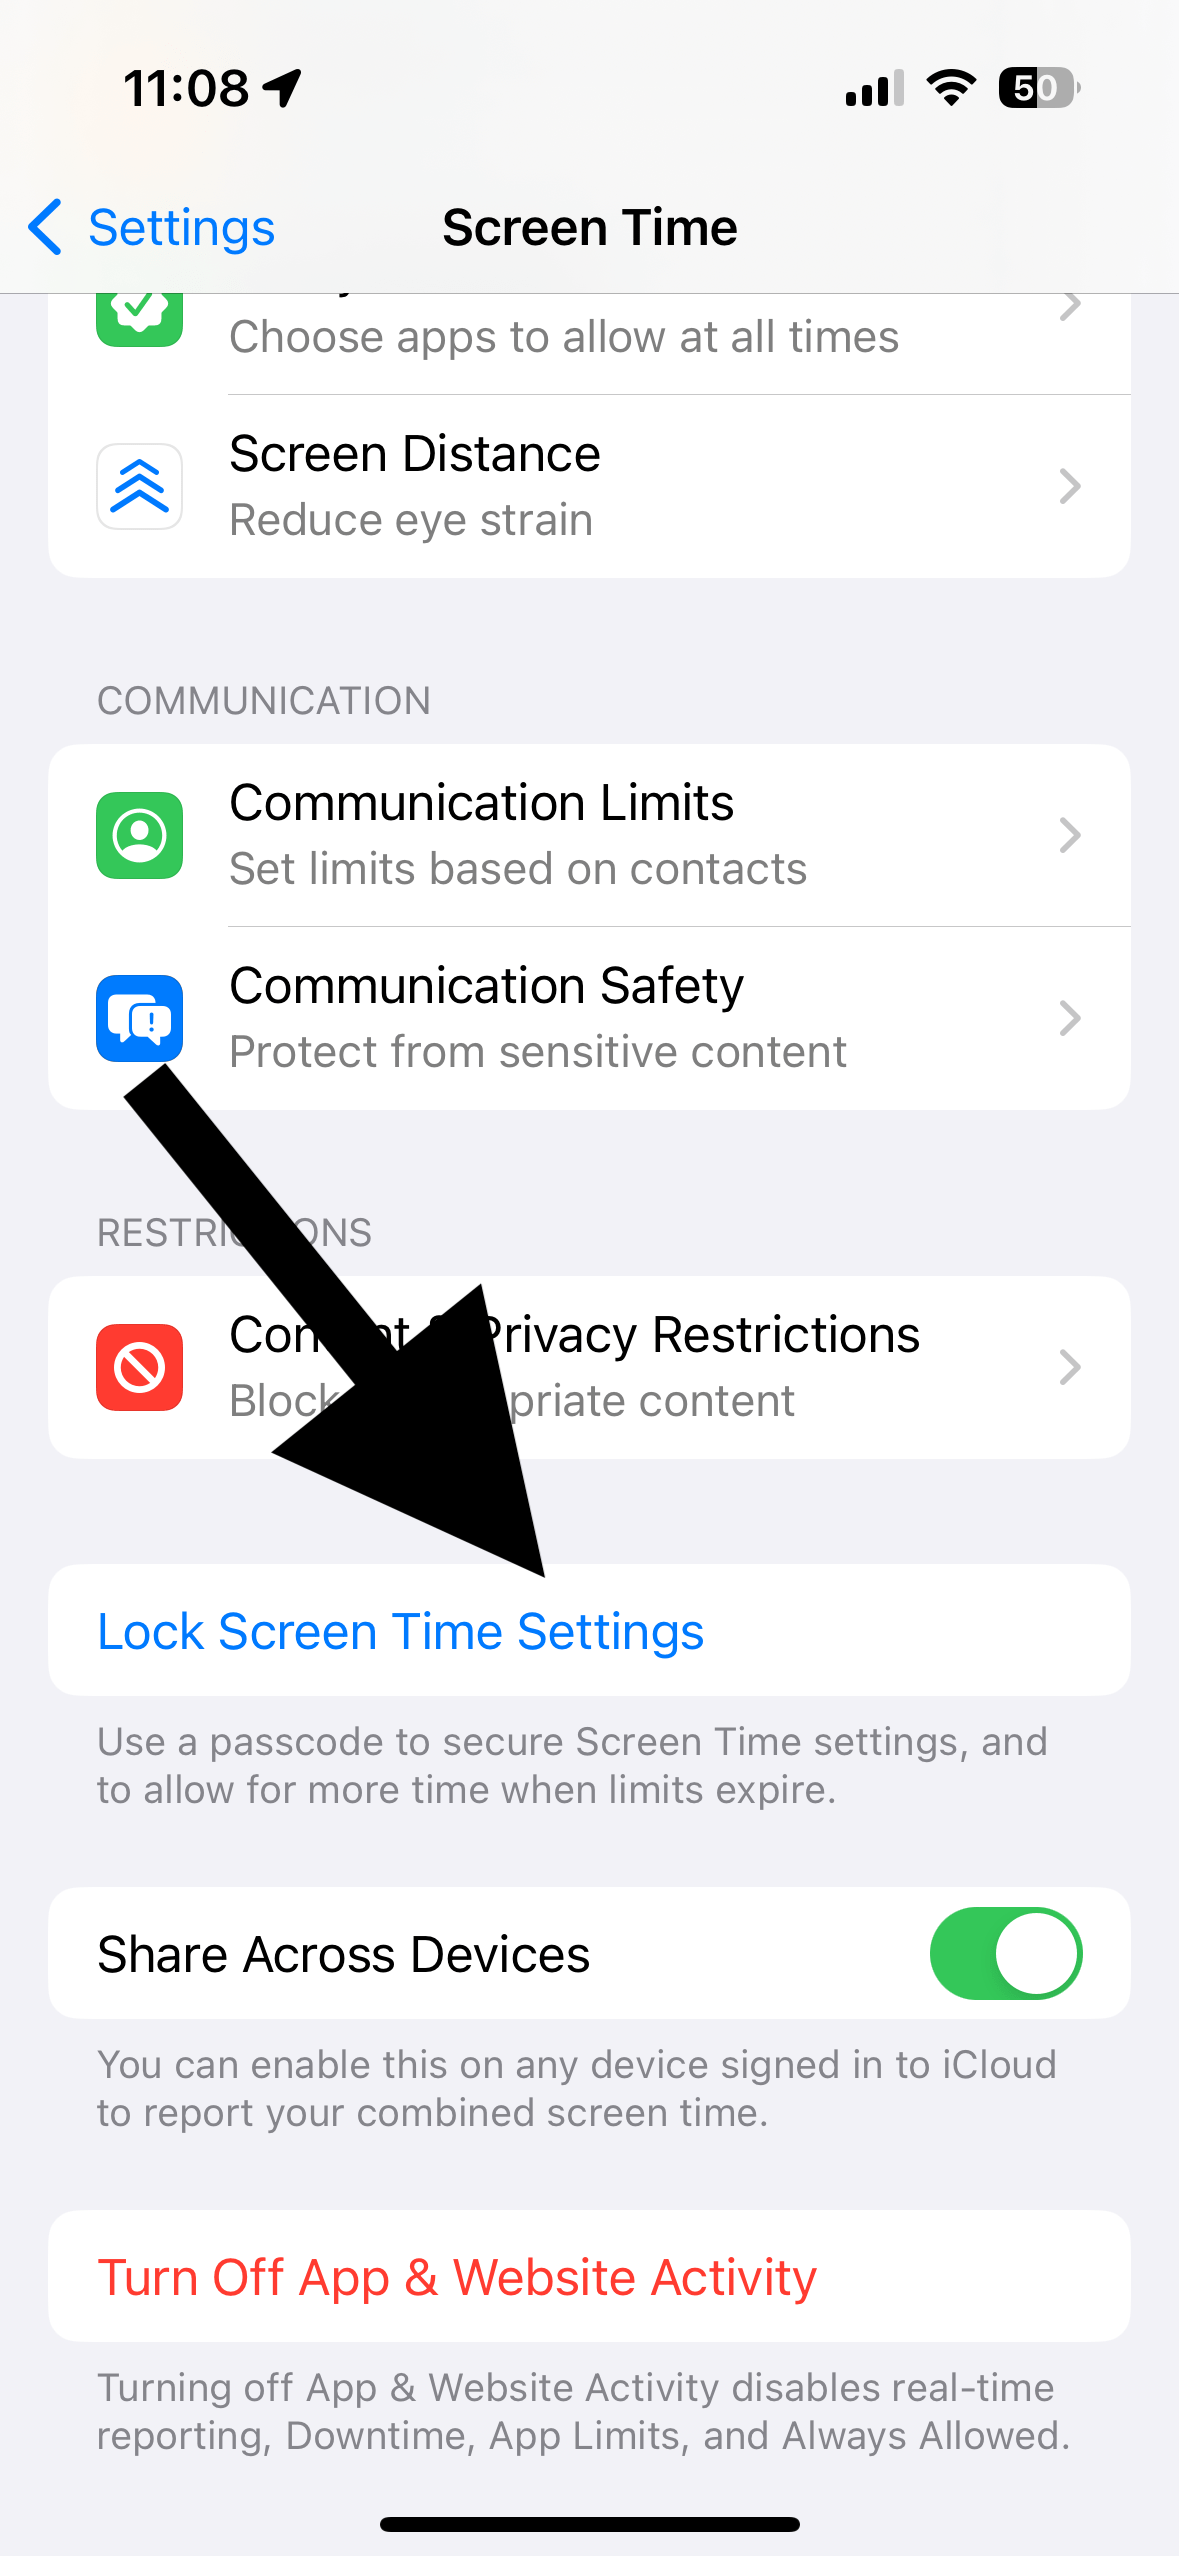 Screen Time for time zone settings